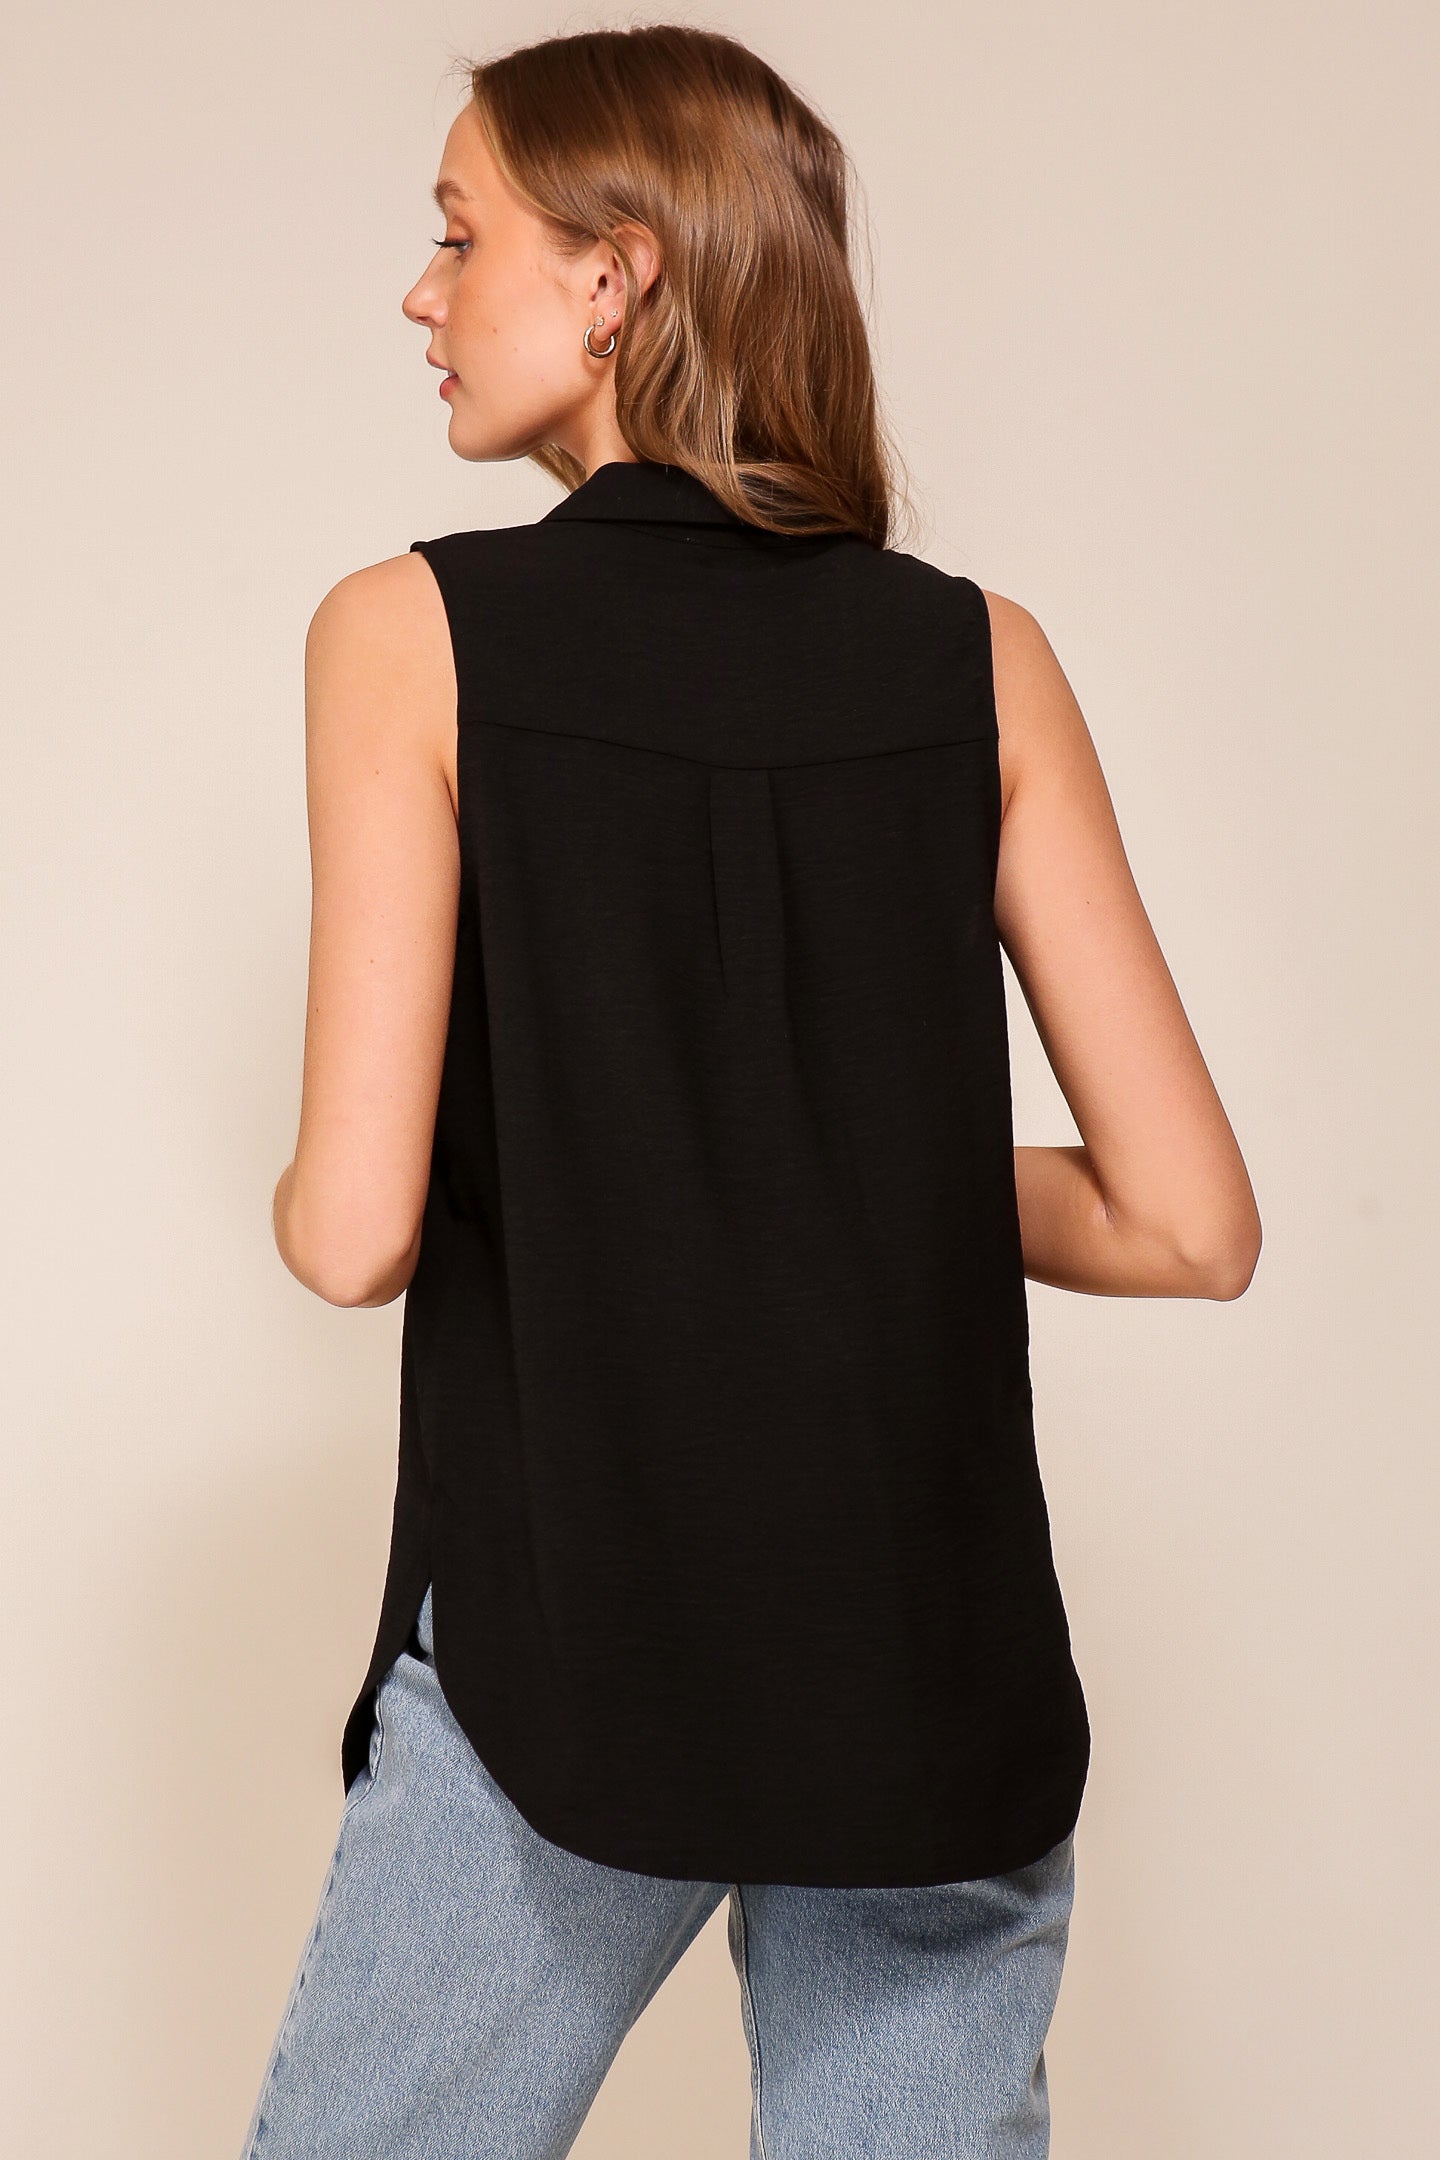 Back view of Timing (WN9713) women's Sleeveless Collared V-Neck Top with Chest Pocket and Flared Silhouette in Black 